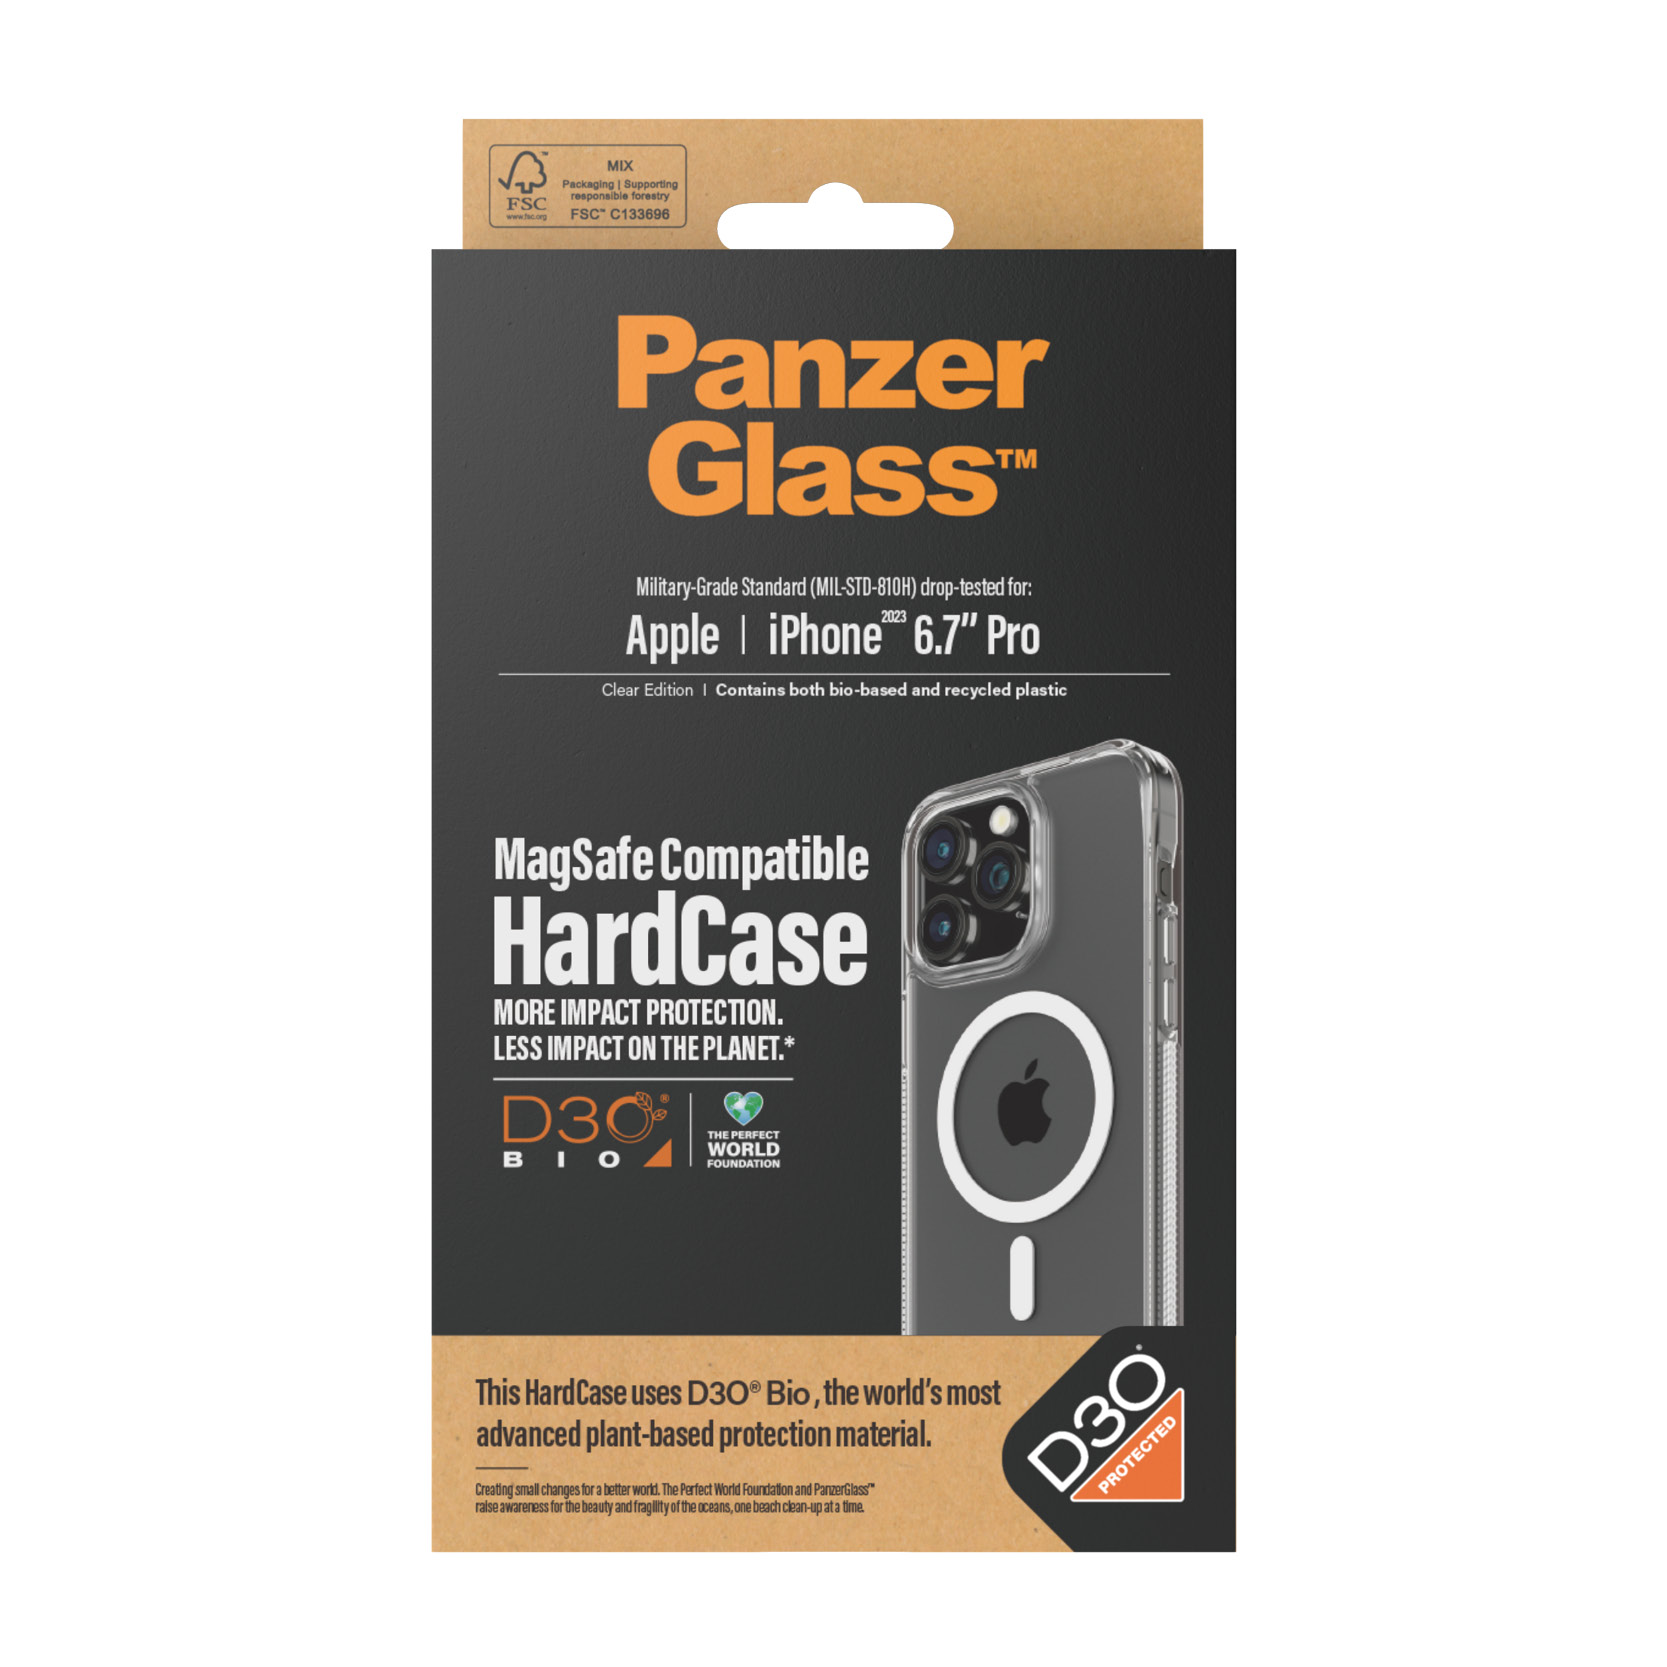 PanzerGlass iPhone 2023 6.7" Pro Max - HardCase MagSafe with D3O